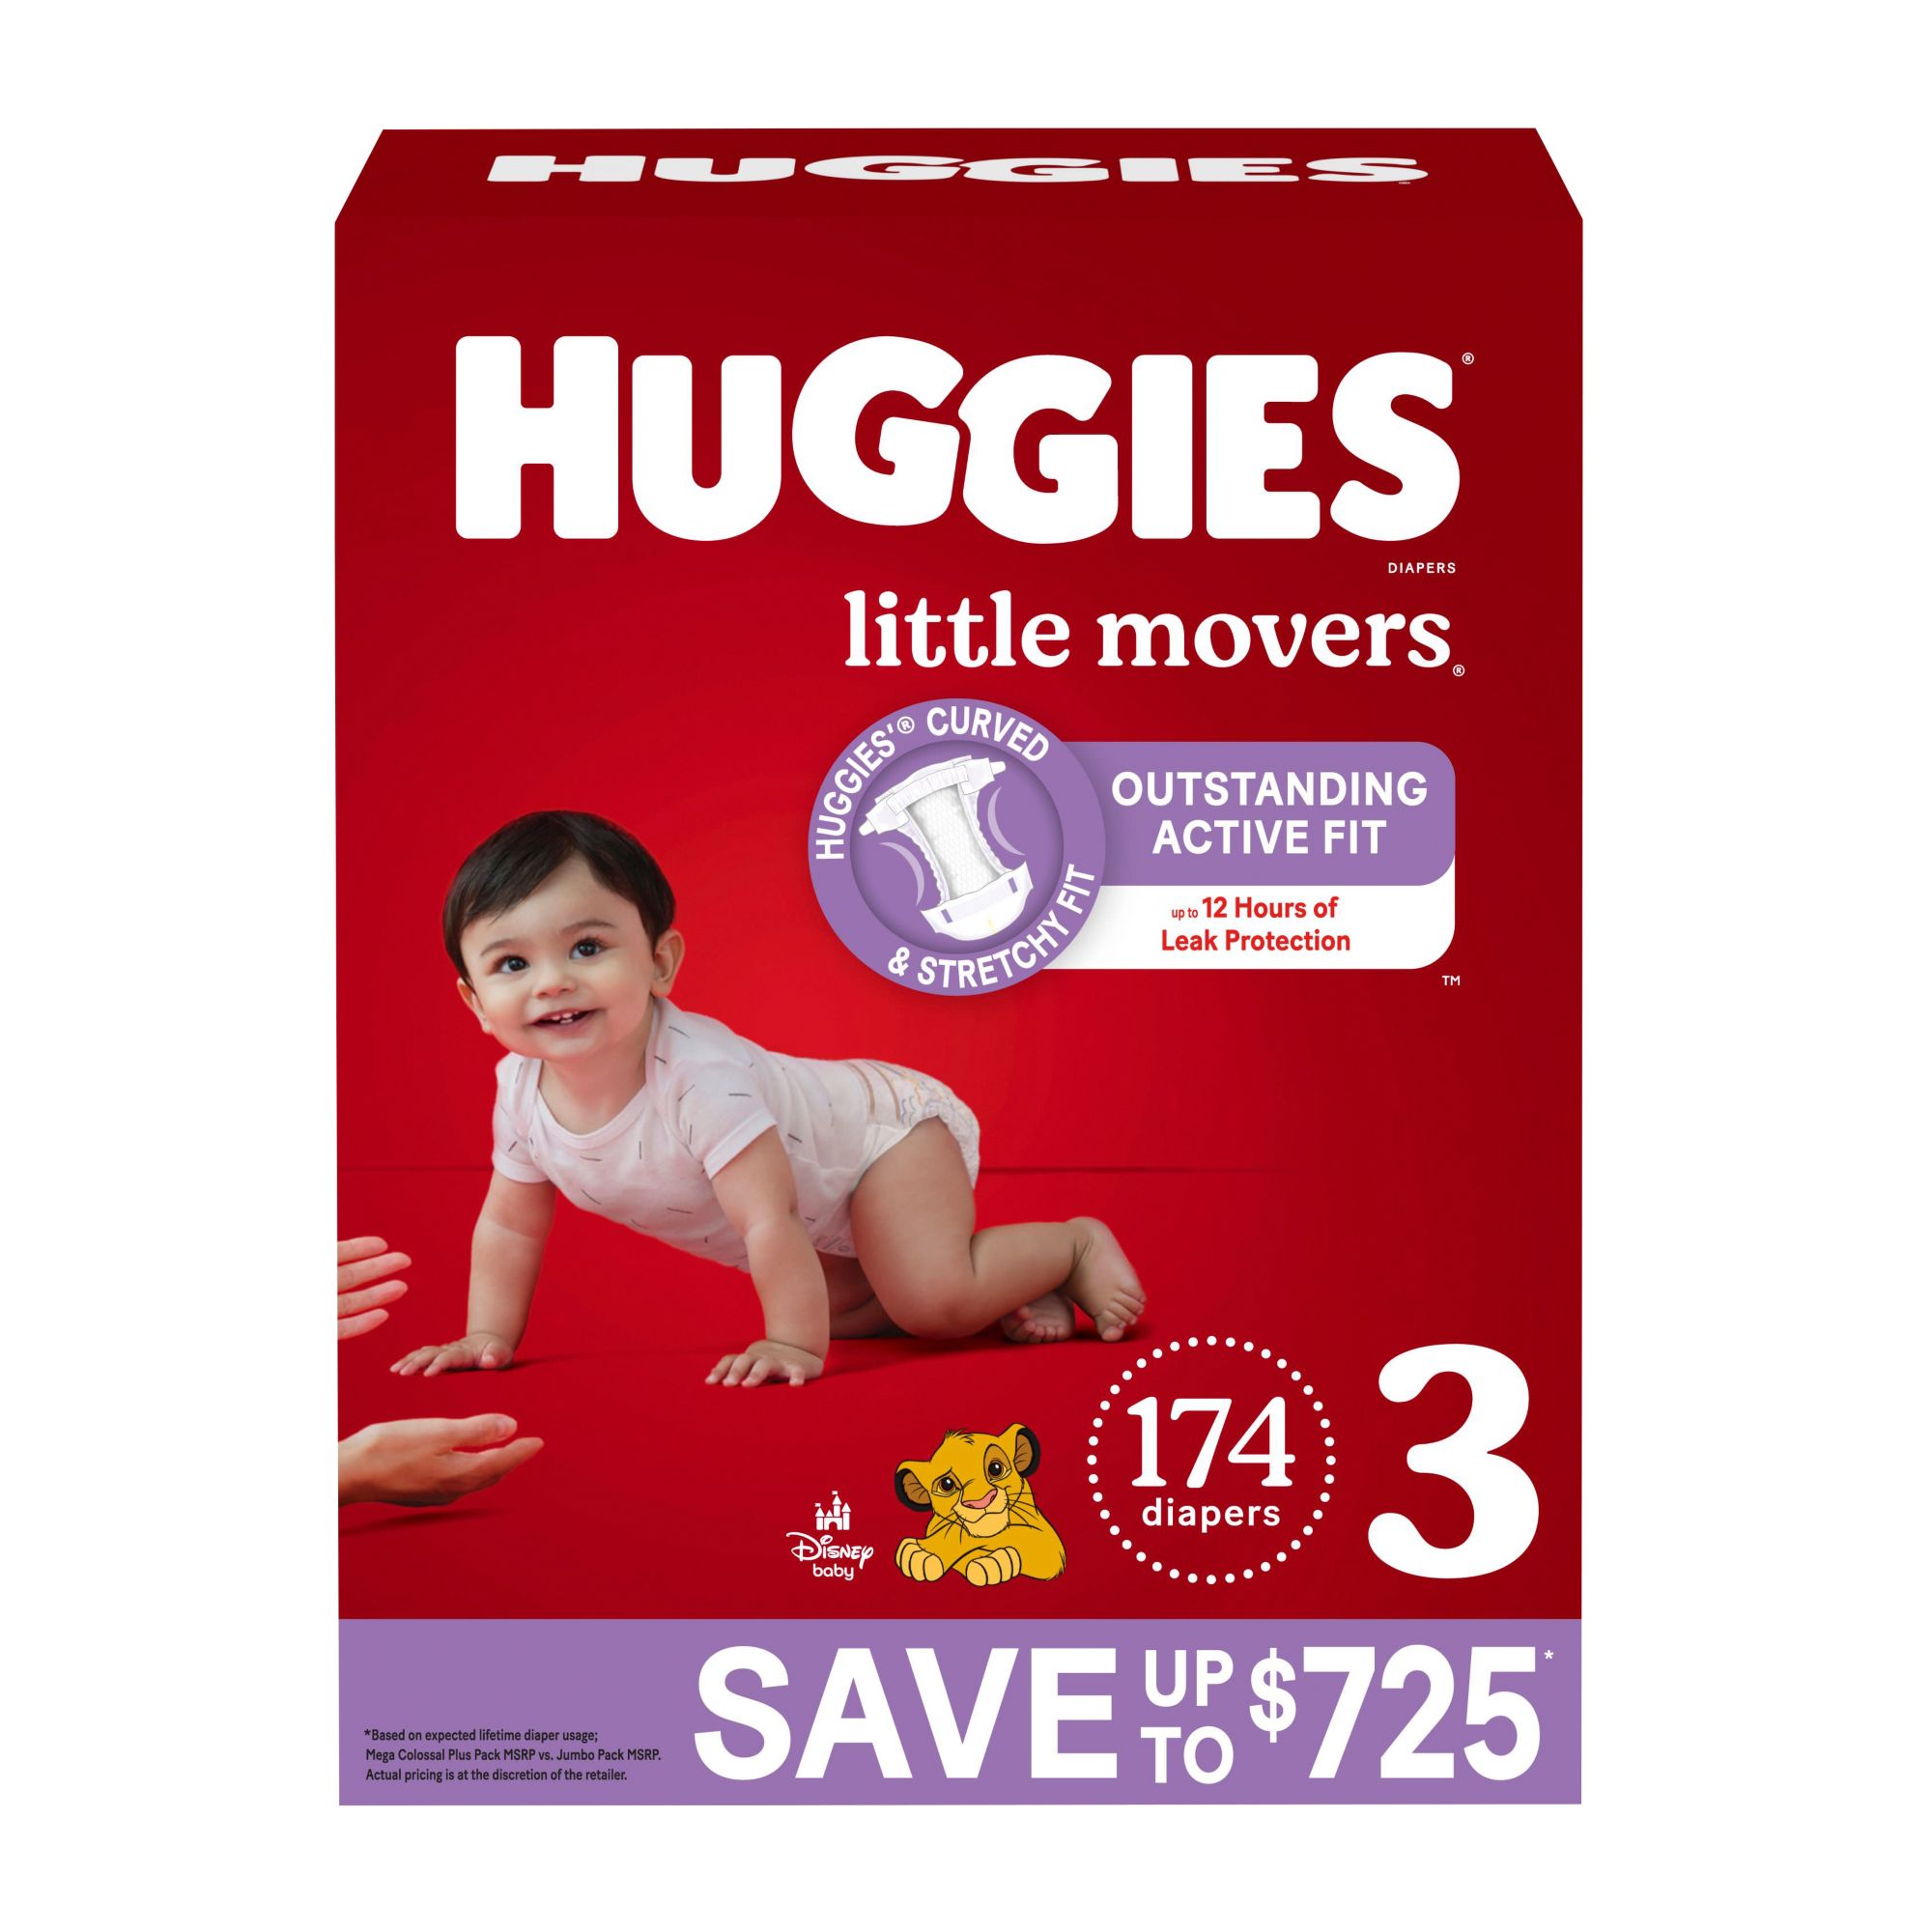 Huggies Little Movers Baby Diapers, Size 4, 104 Ct (Select for More Options)